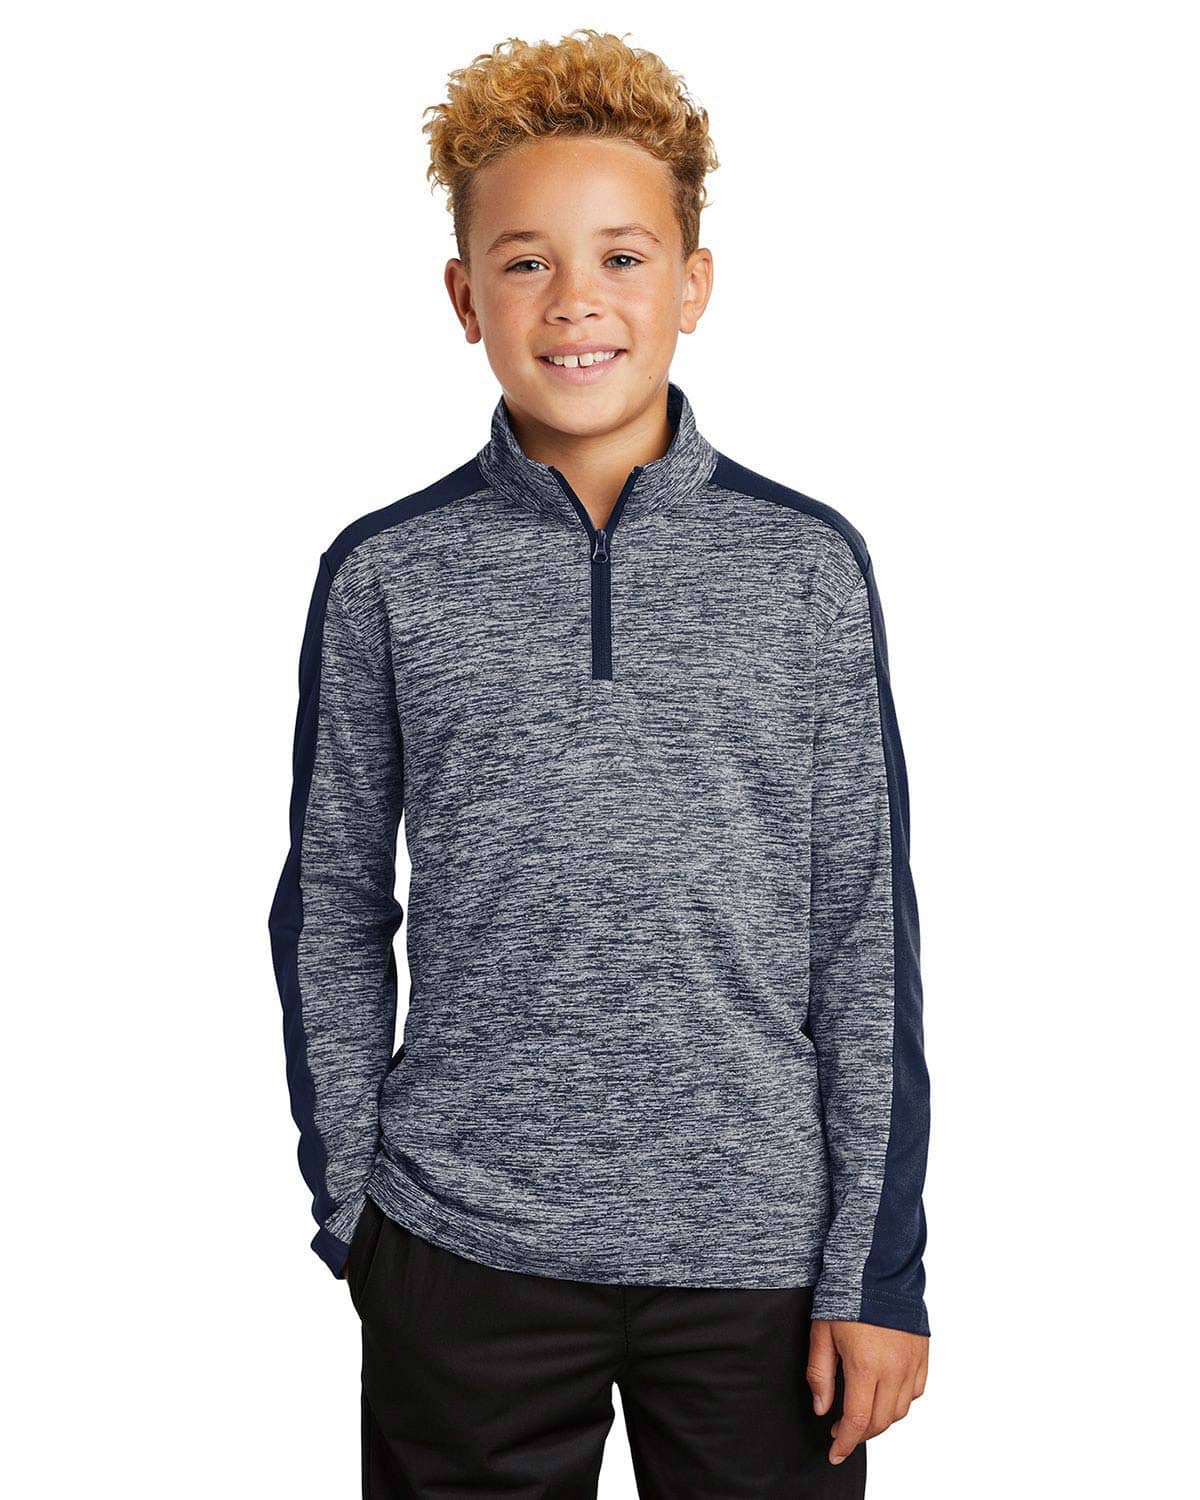 Sport-Tek YST397 Youth PosiCharge Electric Heather Colorblock 1/4-Zip Pullover